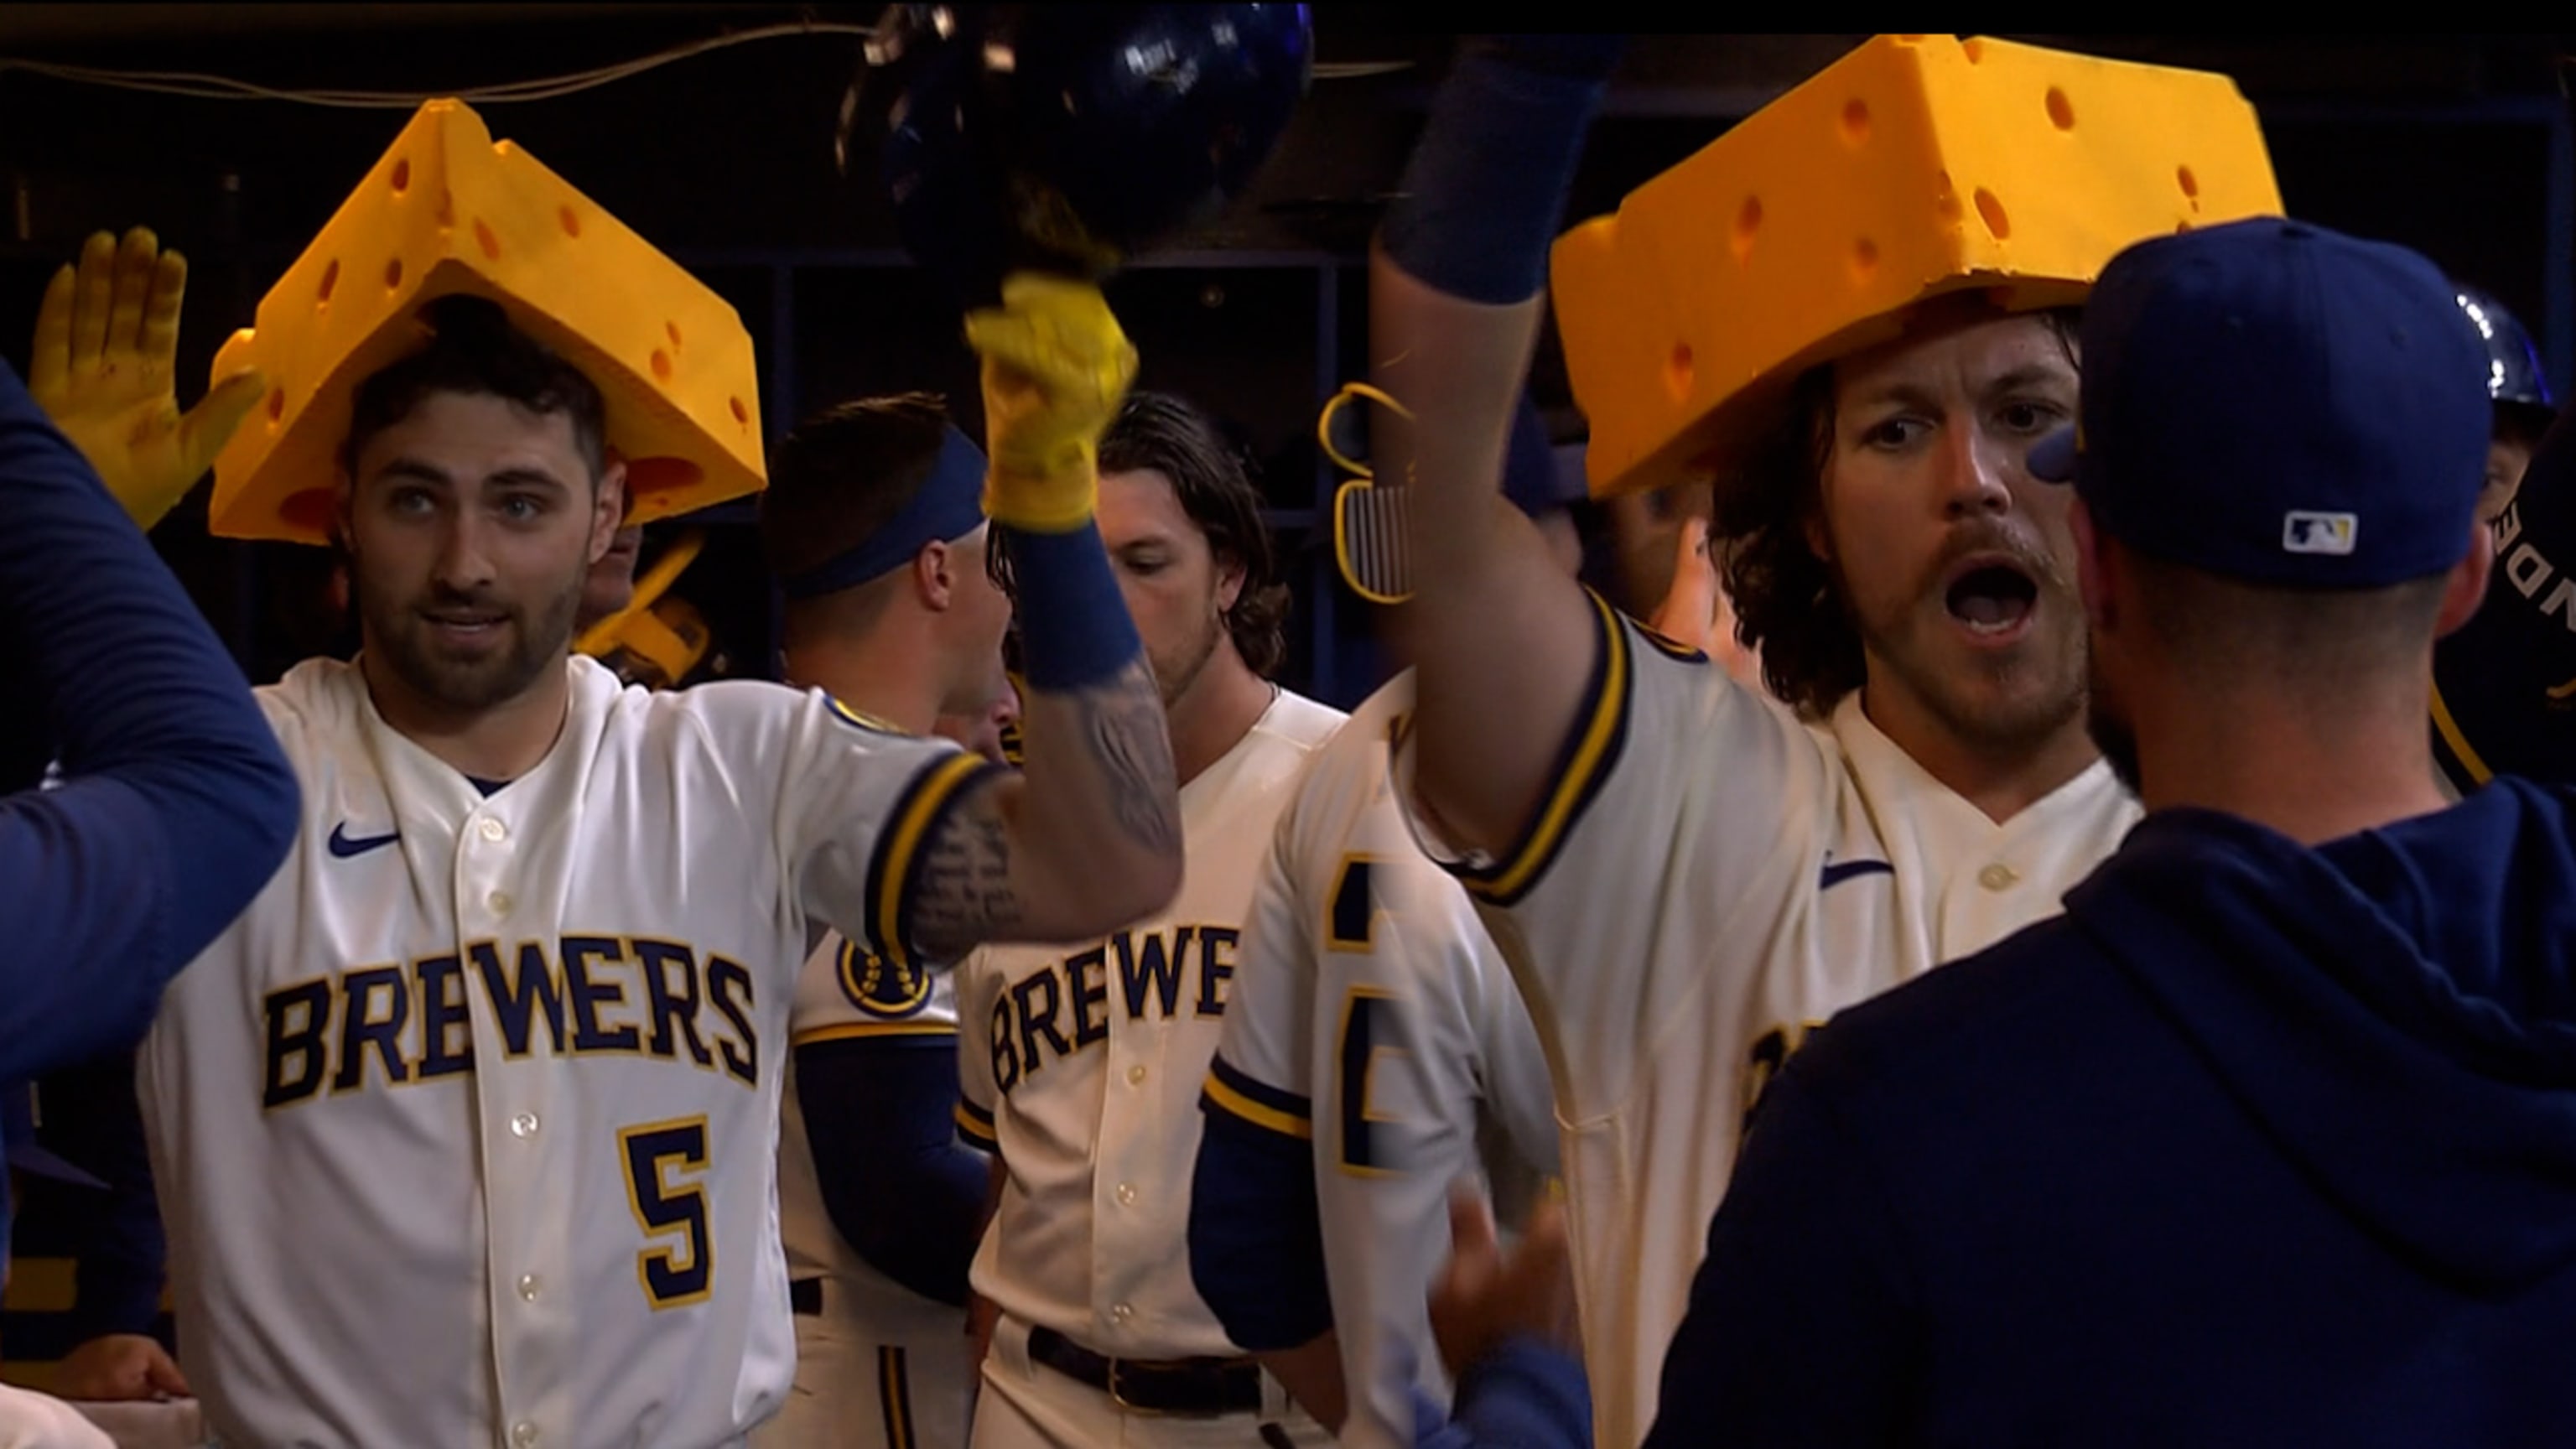 Brewers employ a cheesehead for new home-run celebration